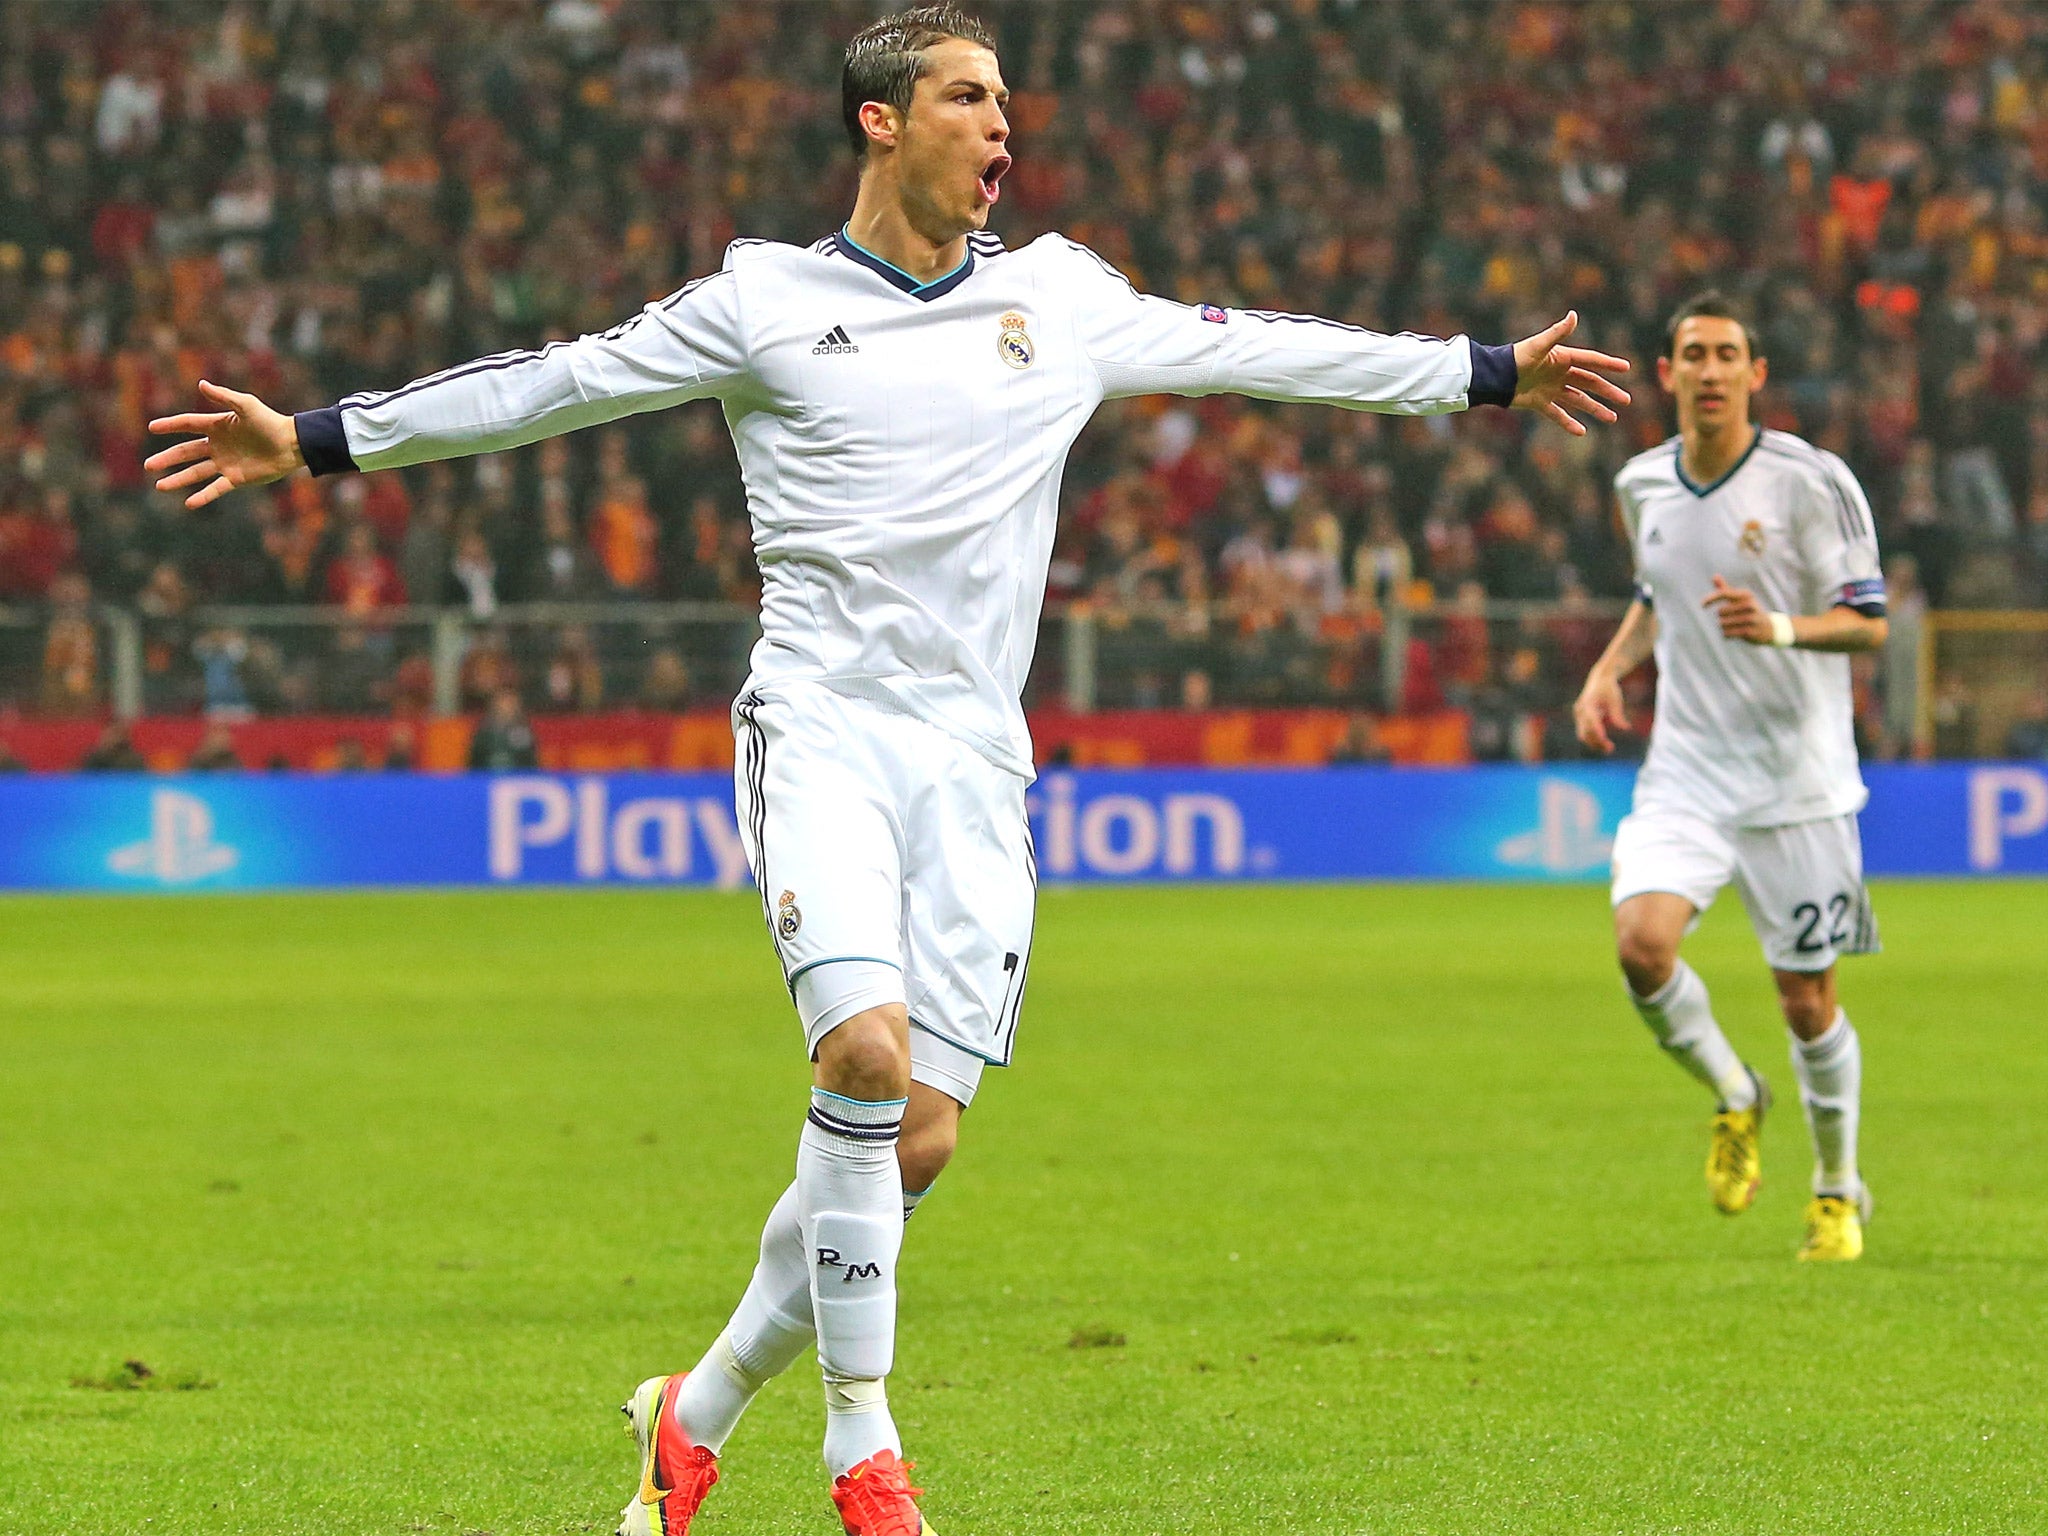 Ronaldo's early goal put the tie beyond Galatasaray even though the Turkish went on to win Wednesday's second leg